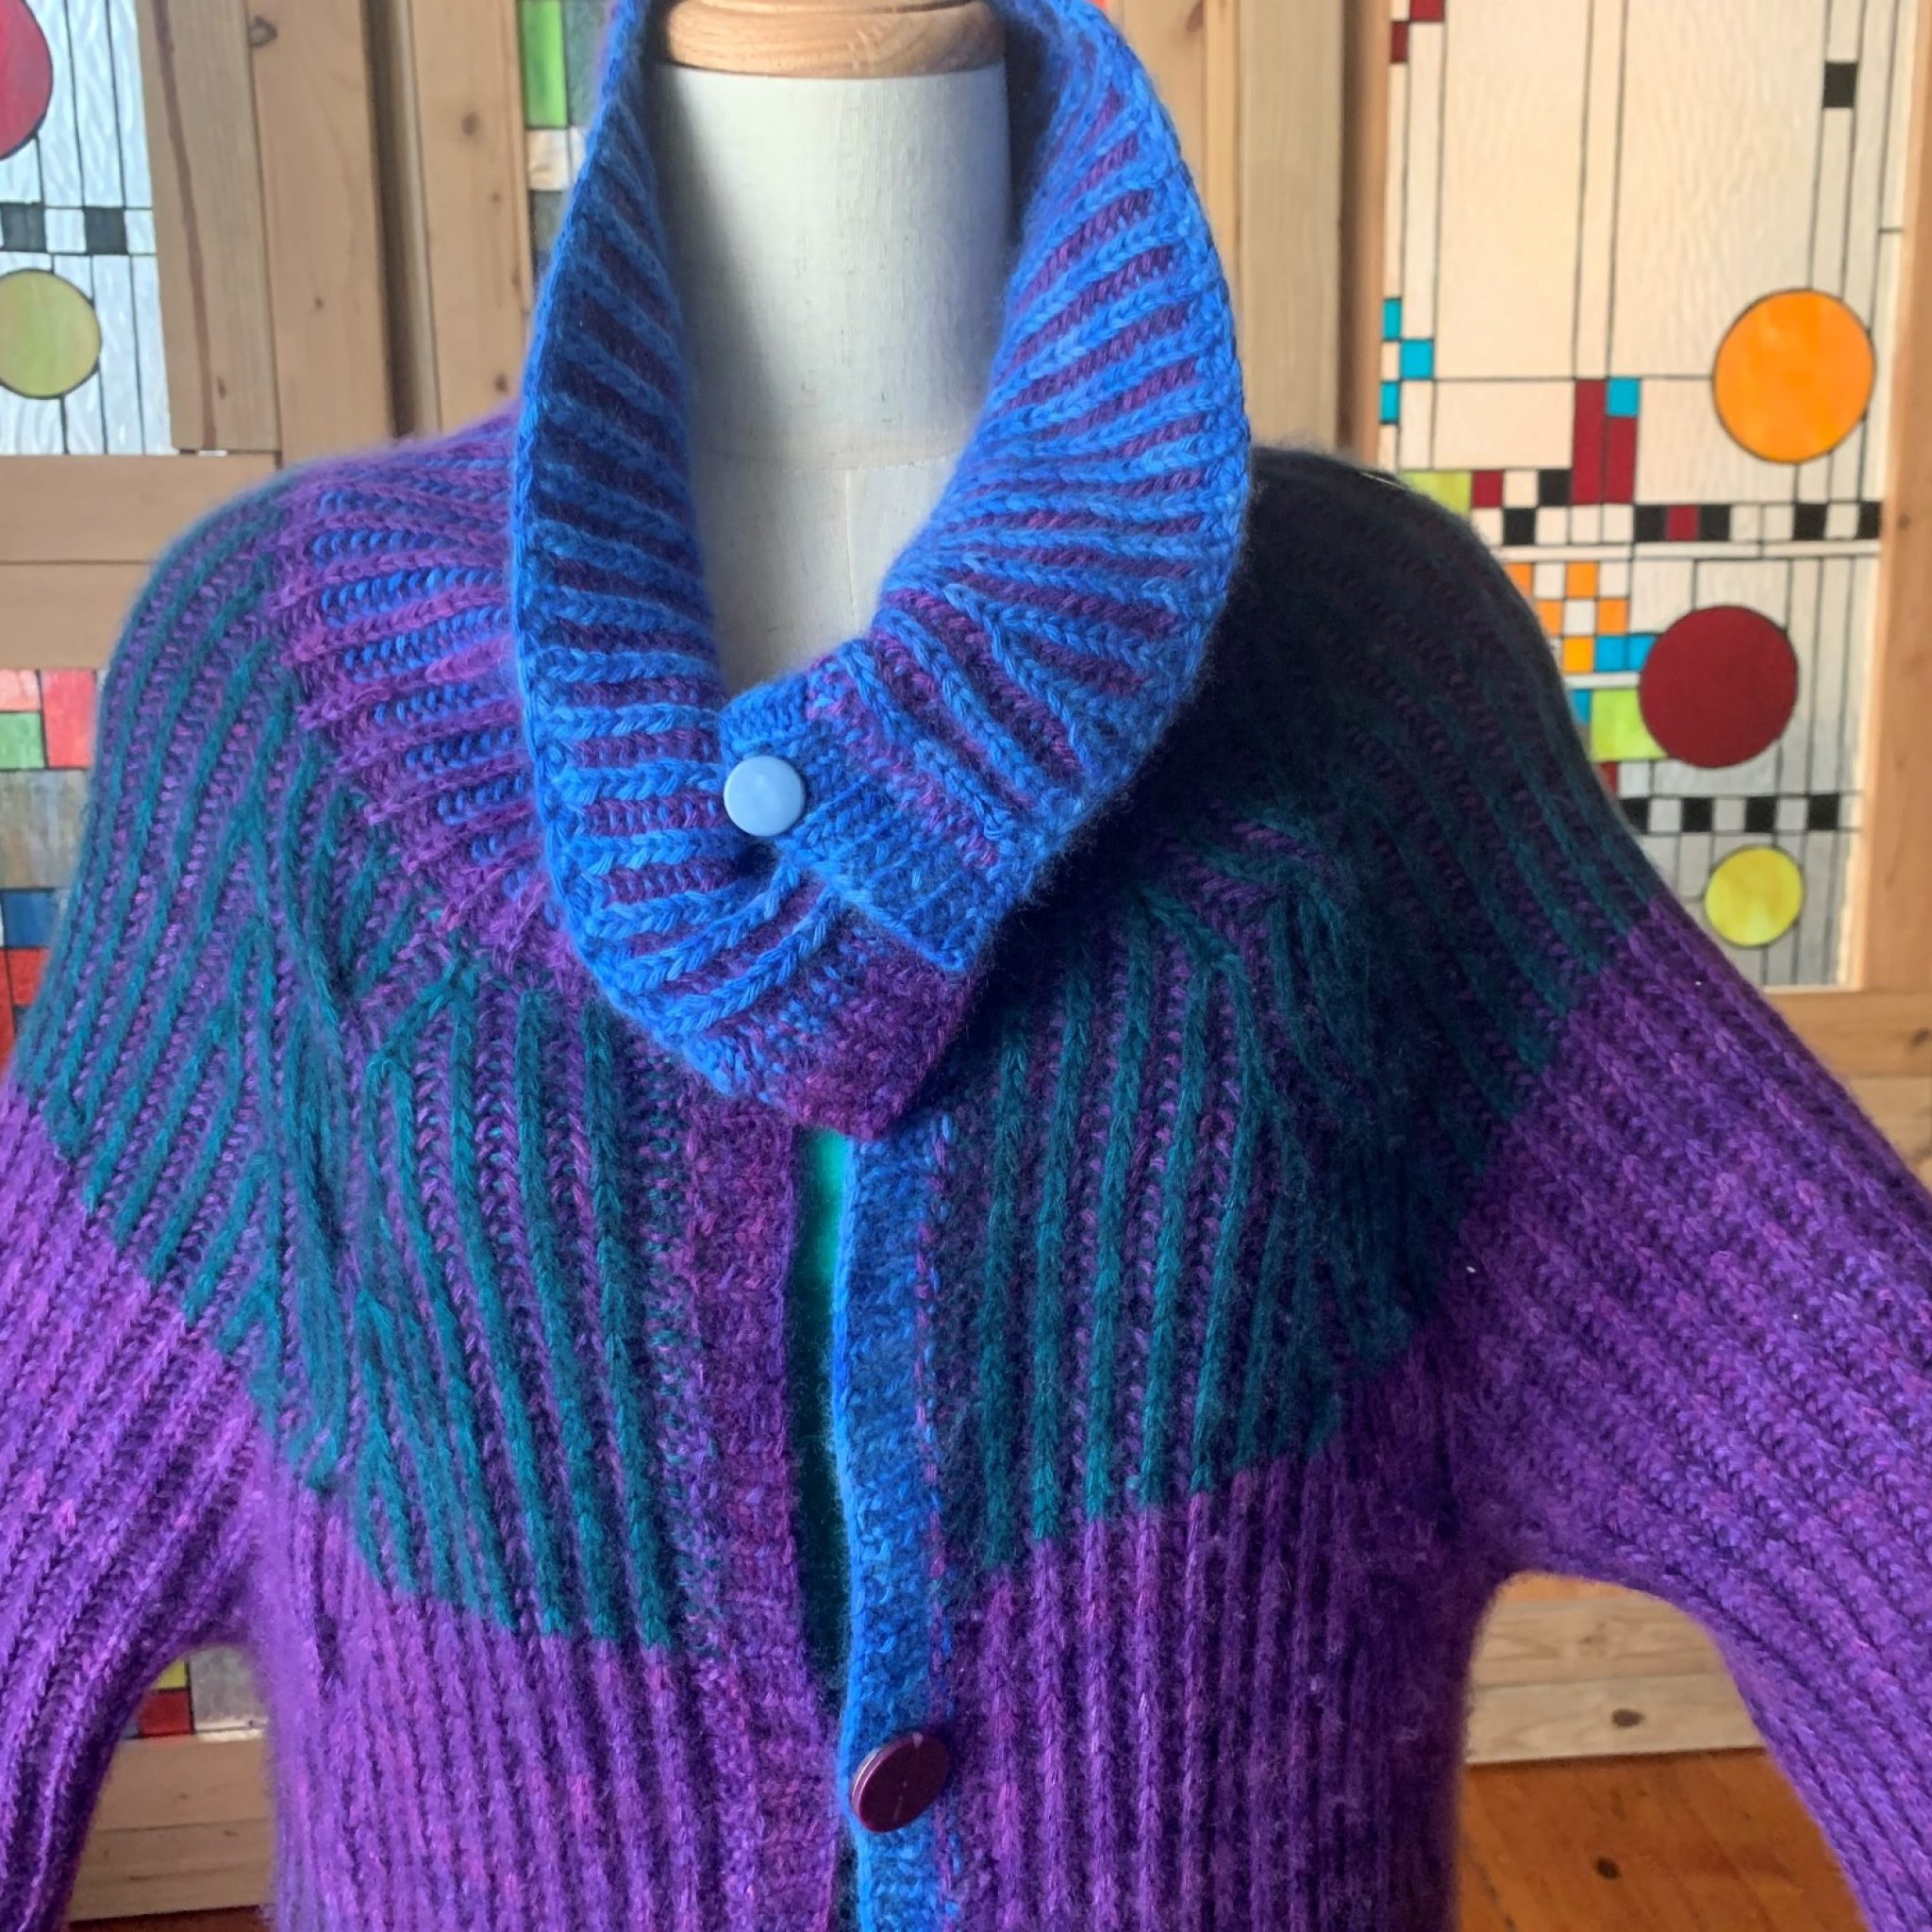 Totally reversible and squishy 2-color brioche cardigan